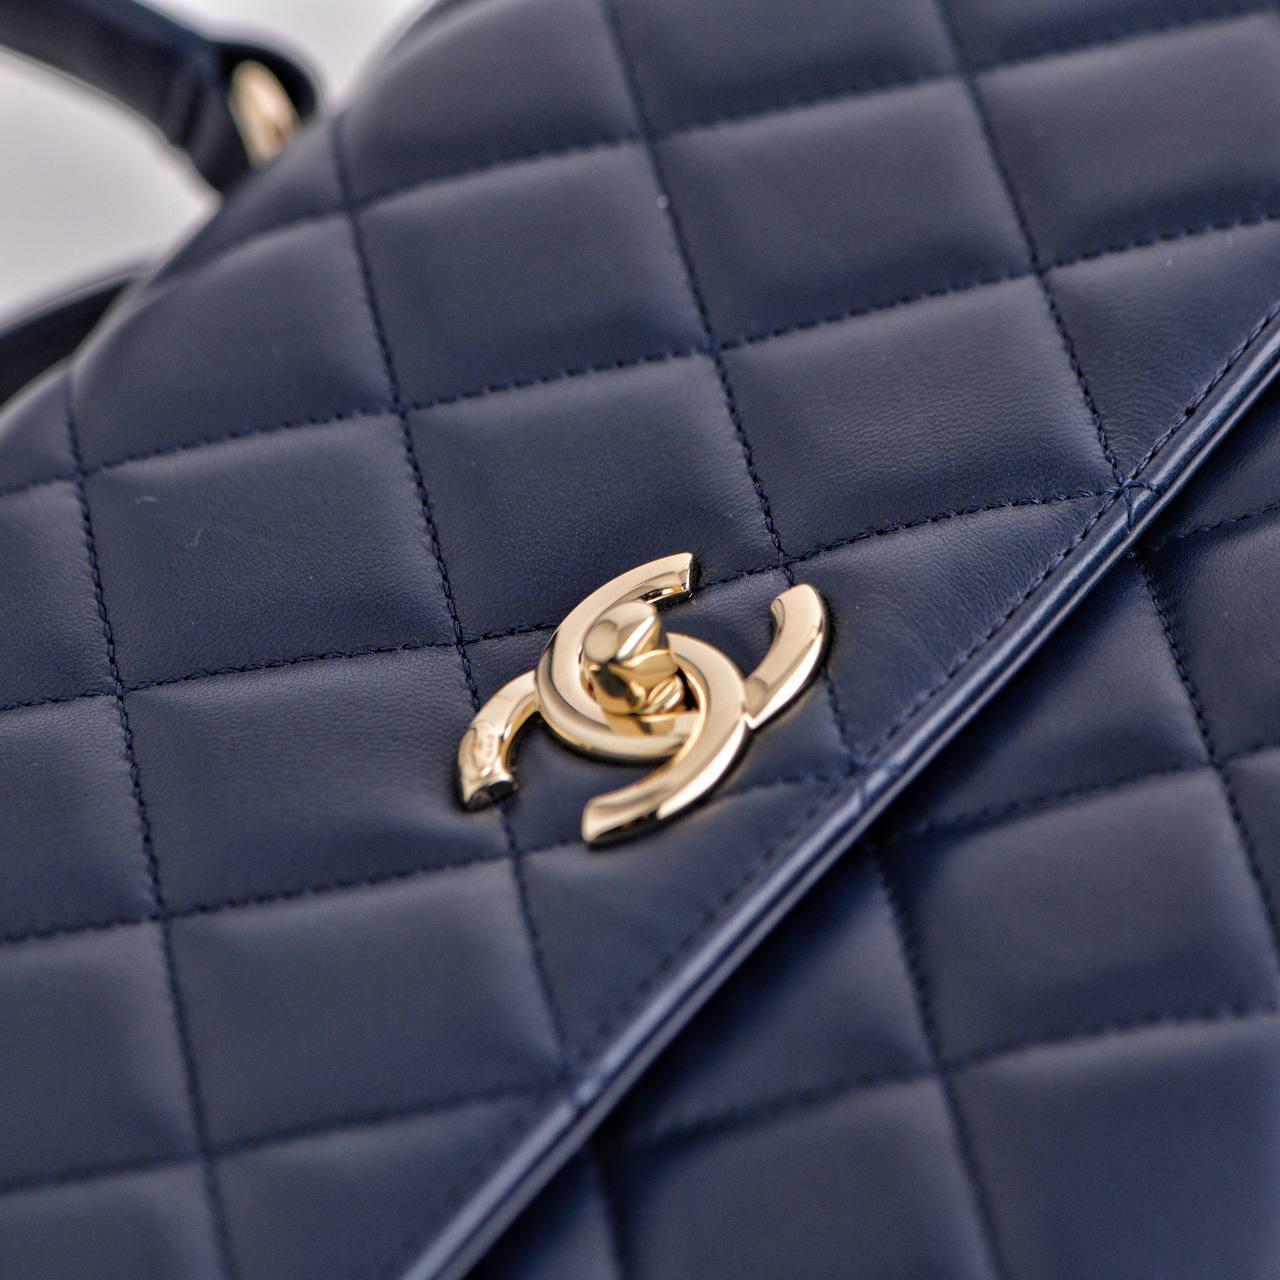 Chanel Large Trendy CC Top Handle Flap Bag in Navy Lambskin In Excellent Condition For Sale In Banbury, GB